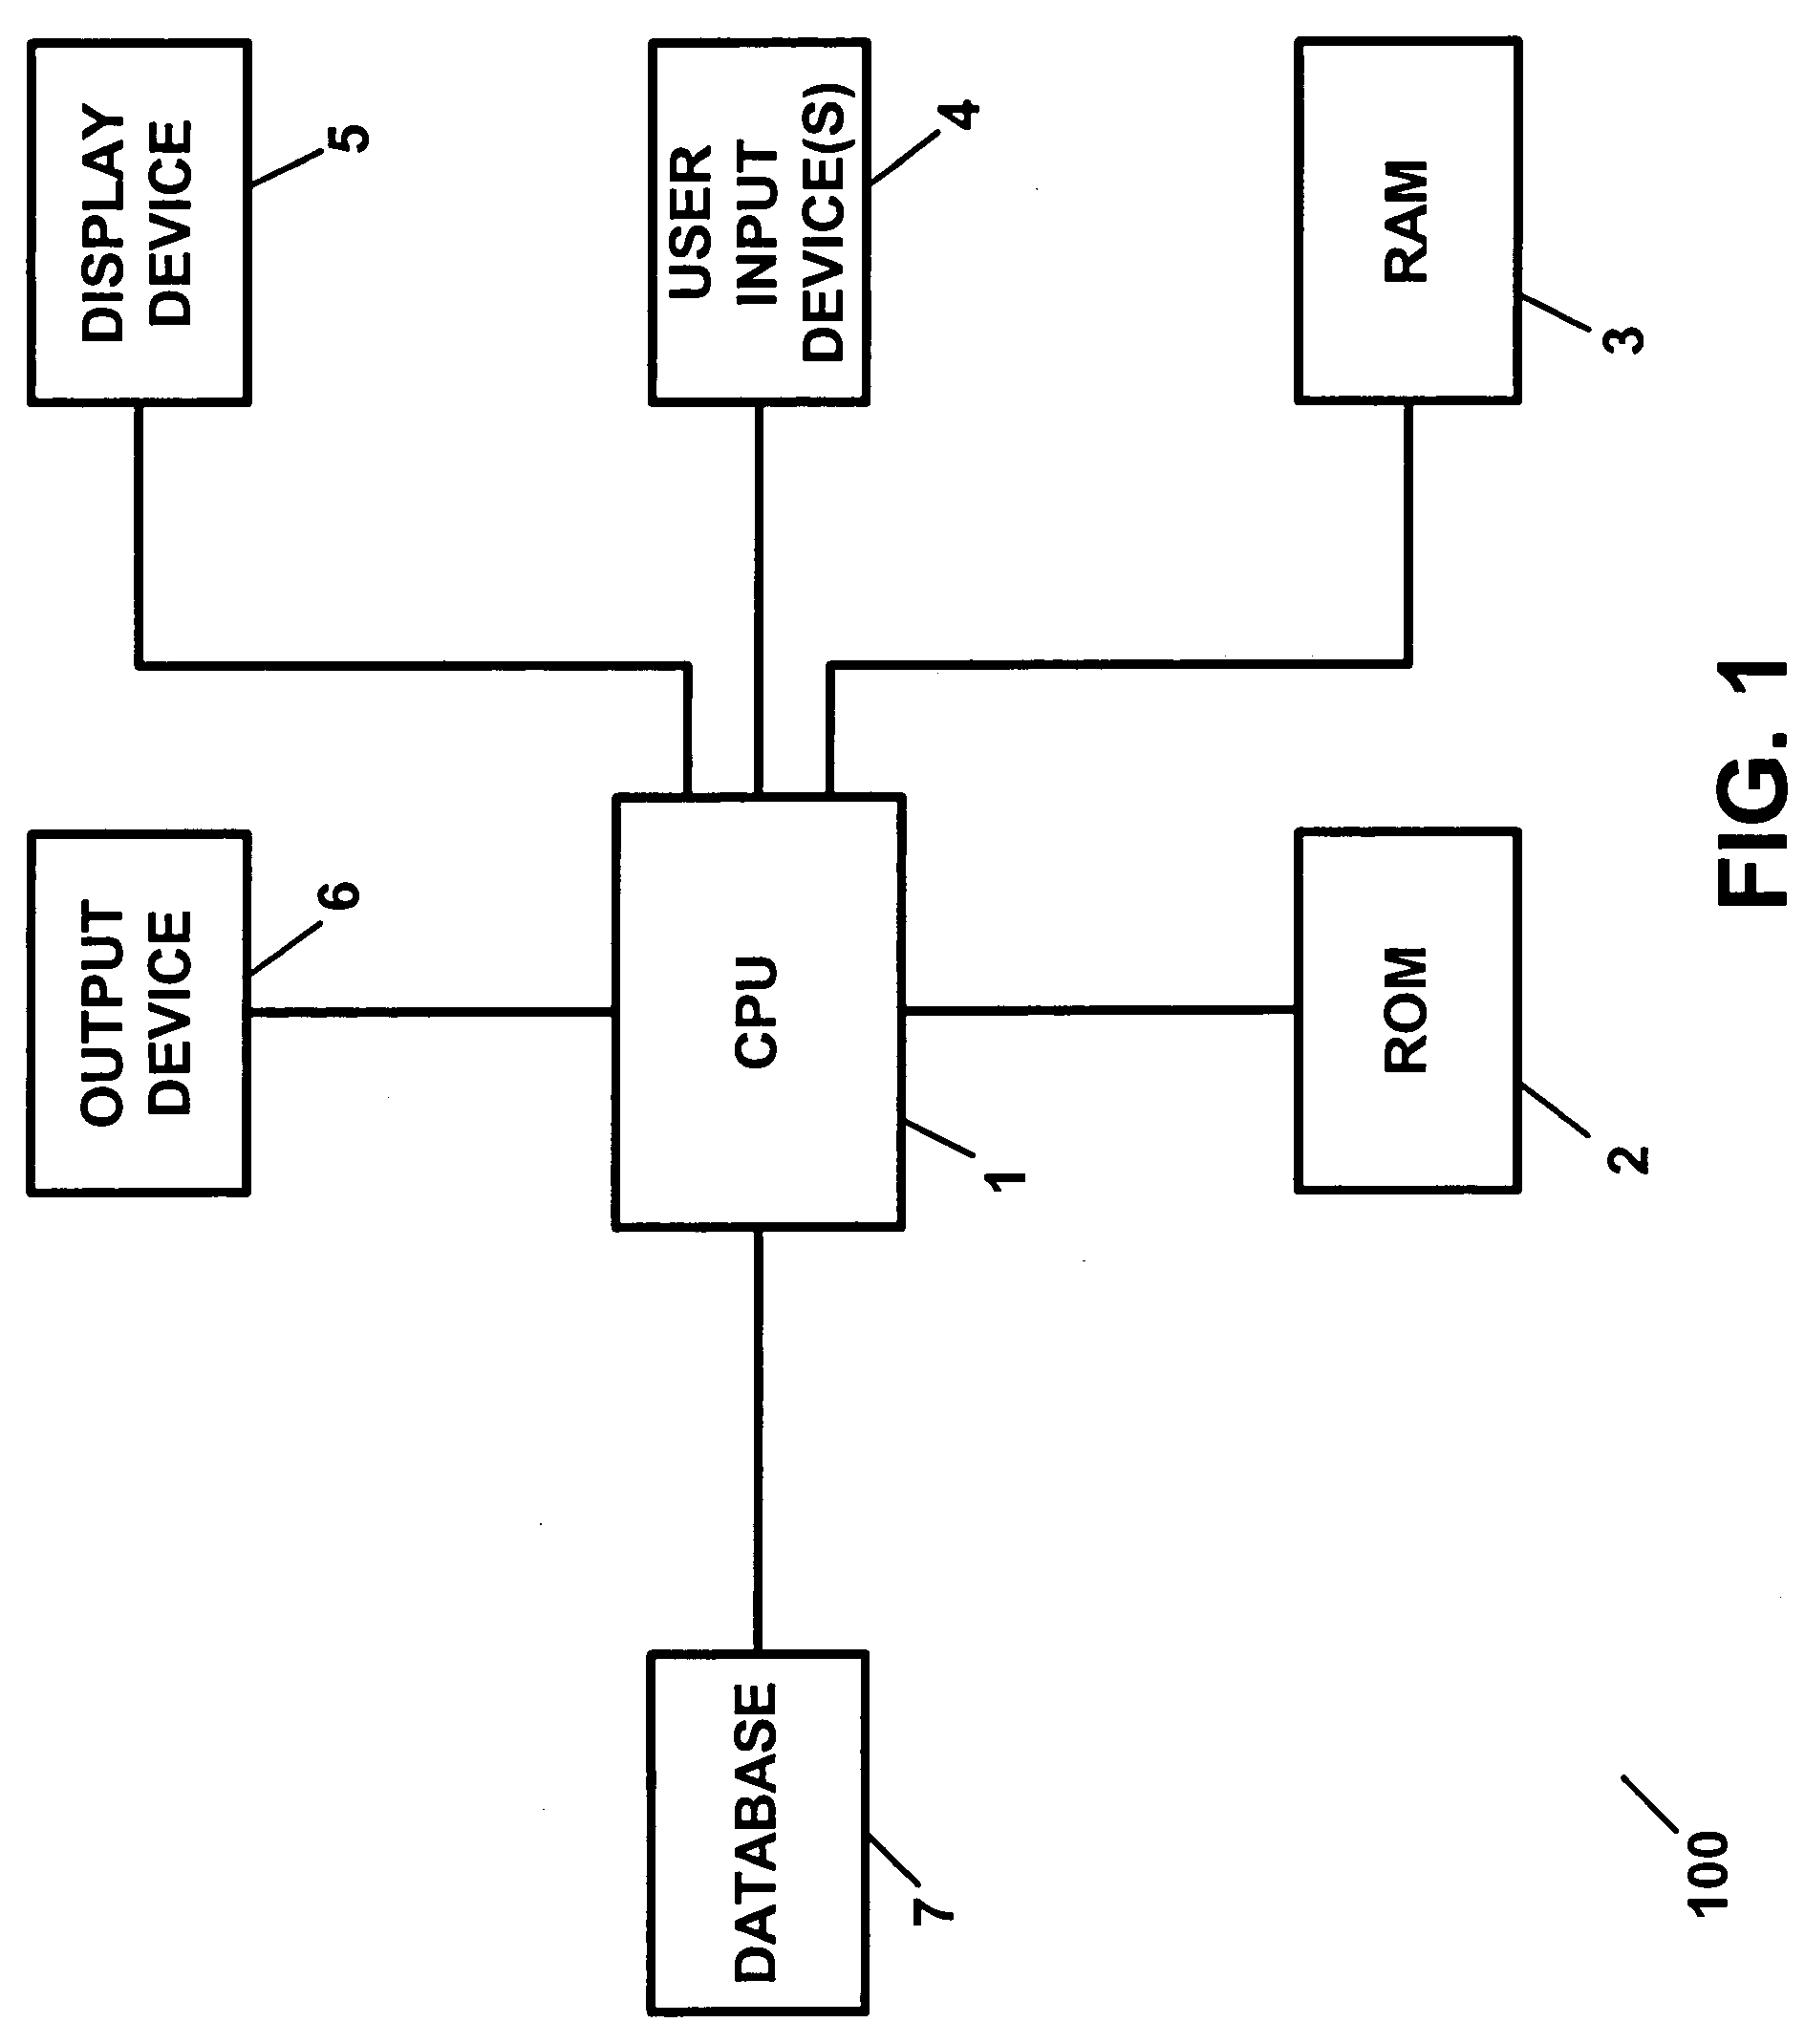 Apparatus and method for processing lease insurance information